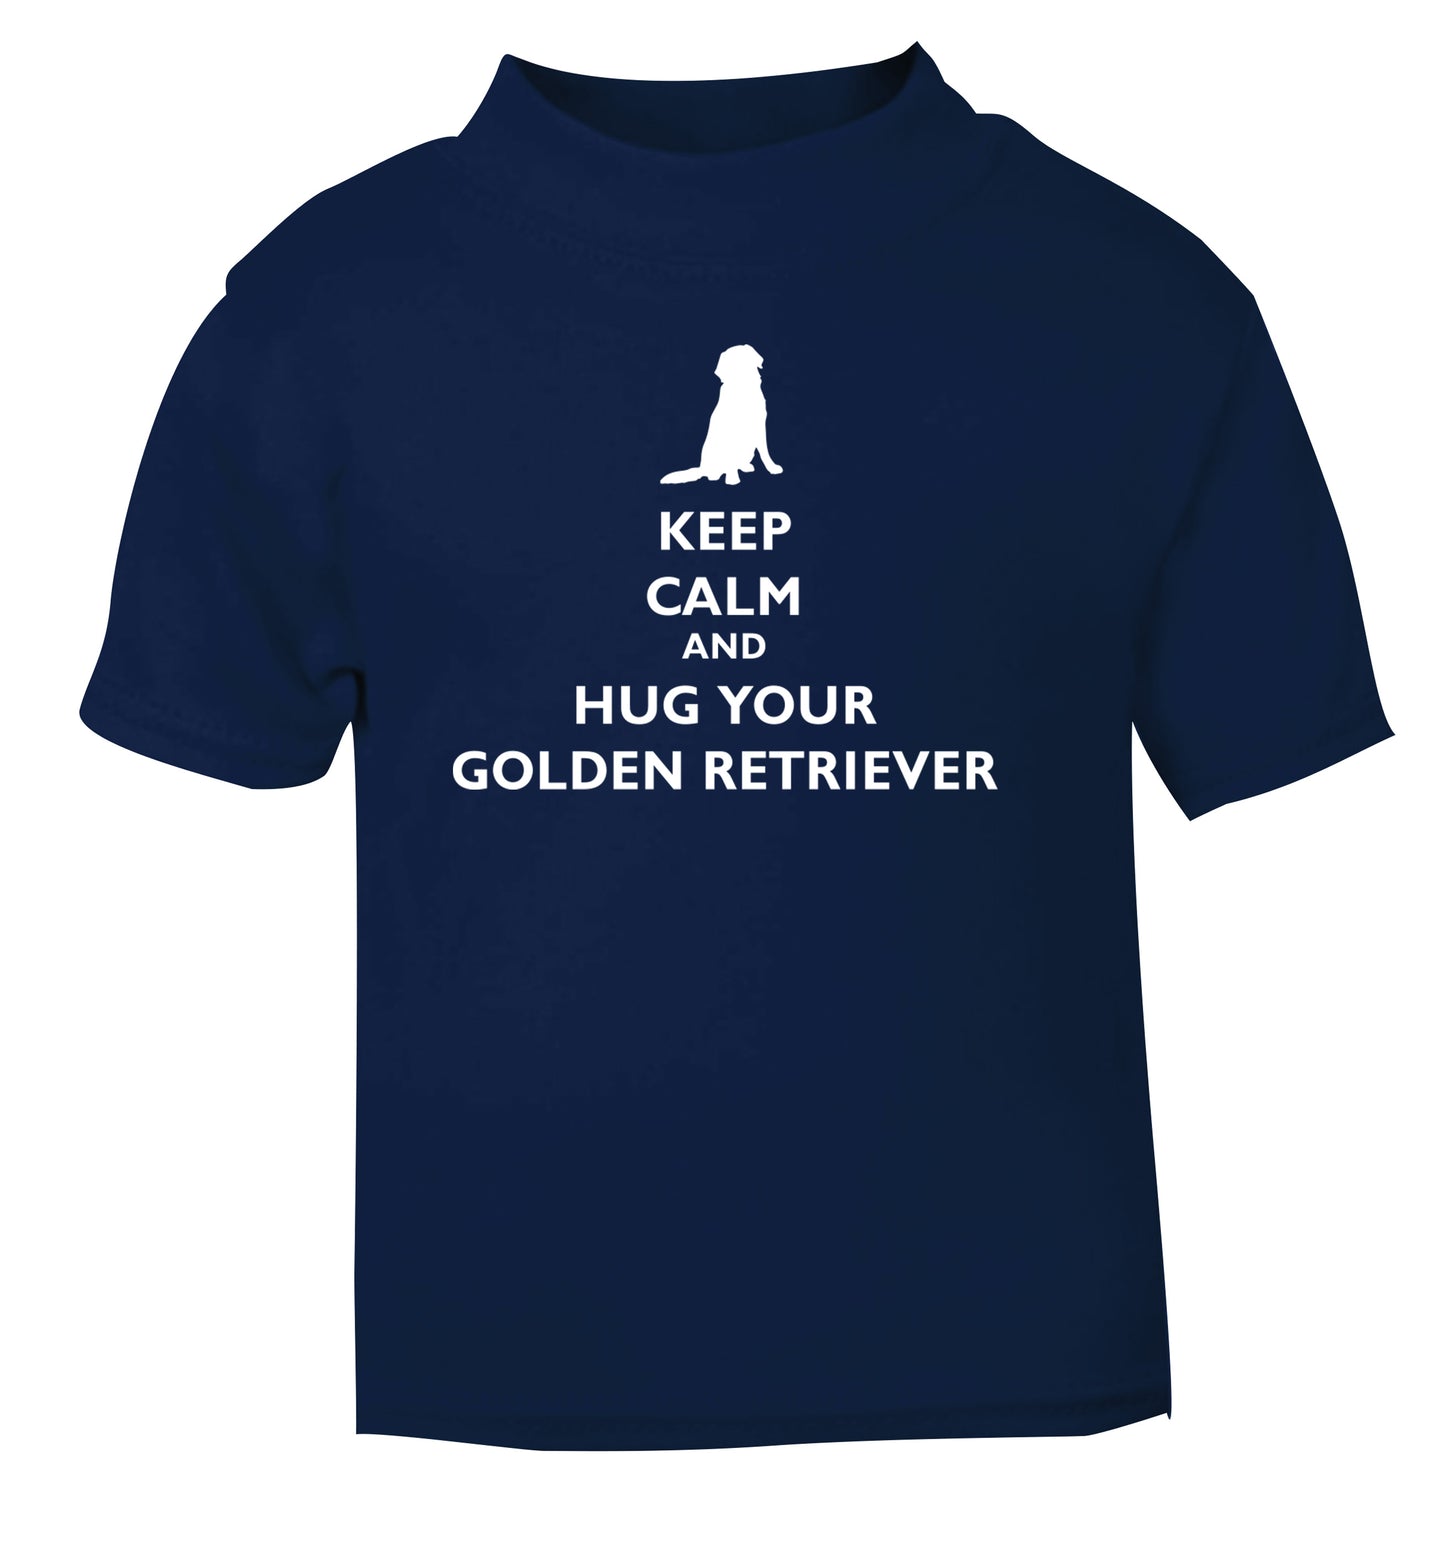 Keep calm and hug your golden retriever navy Baby Toddler Tshirt 2 Years